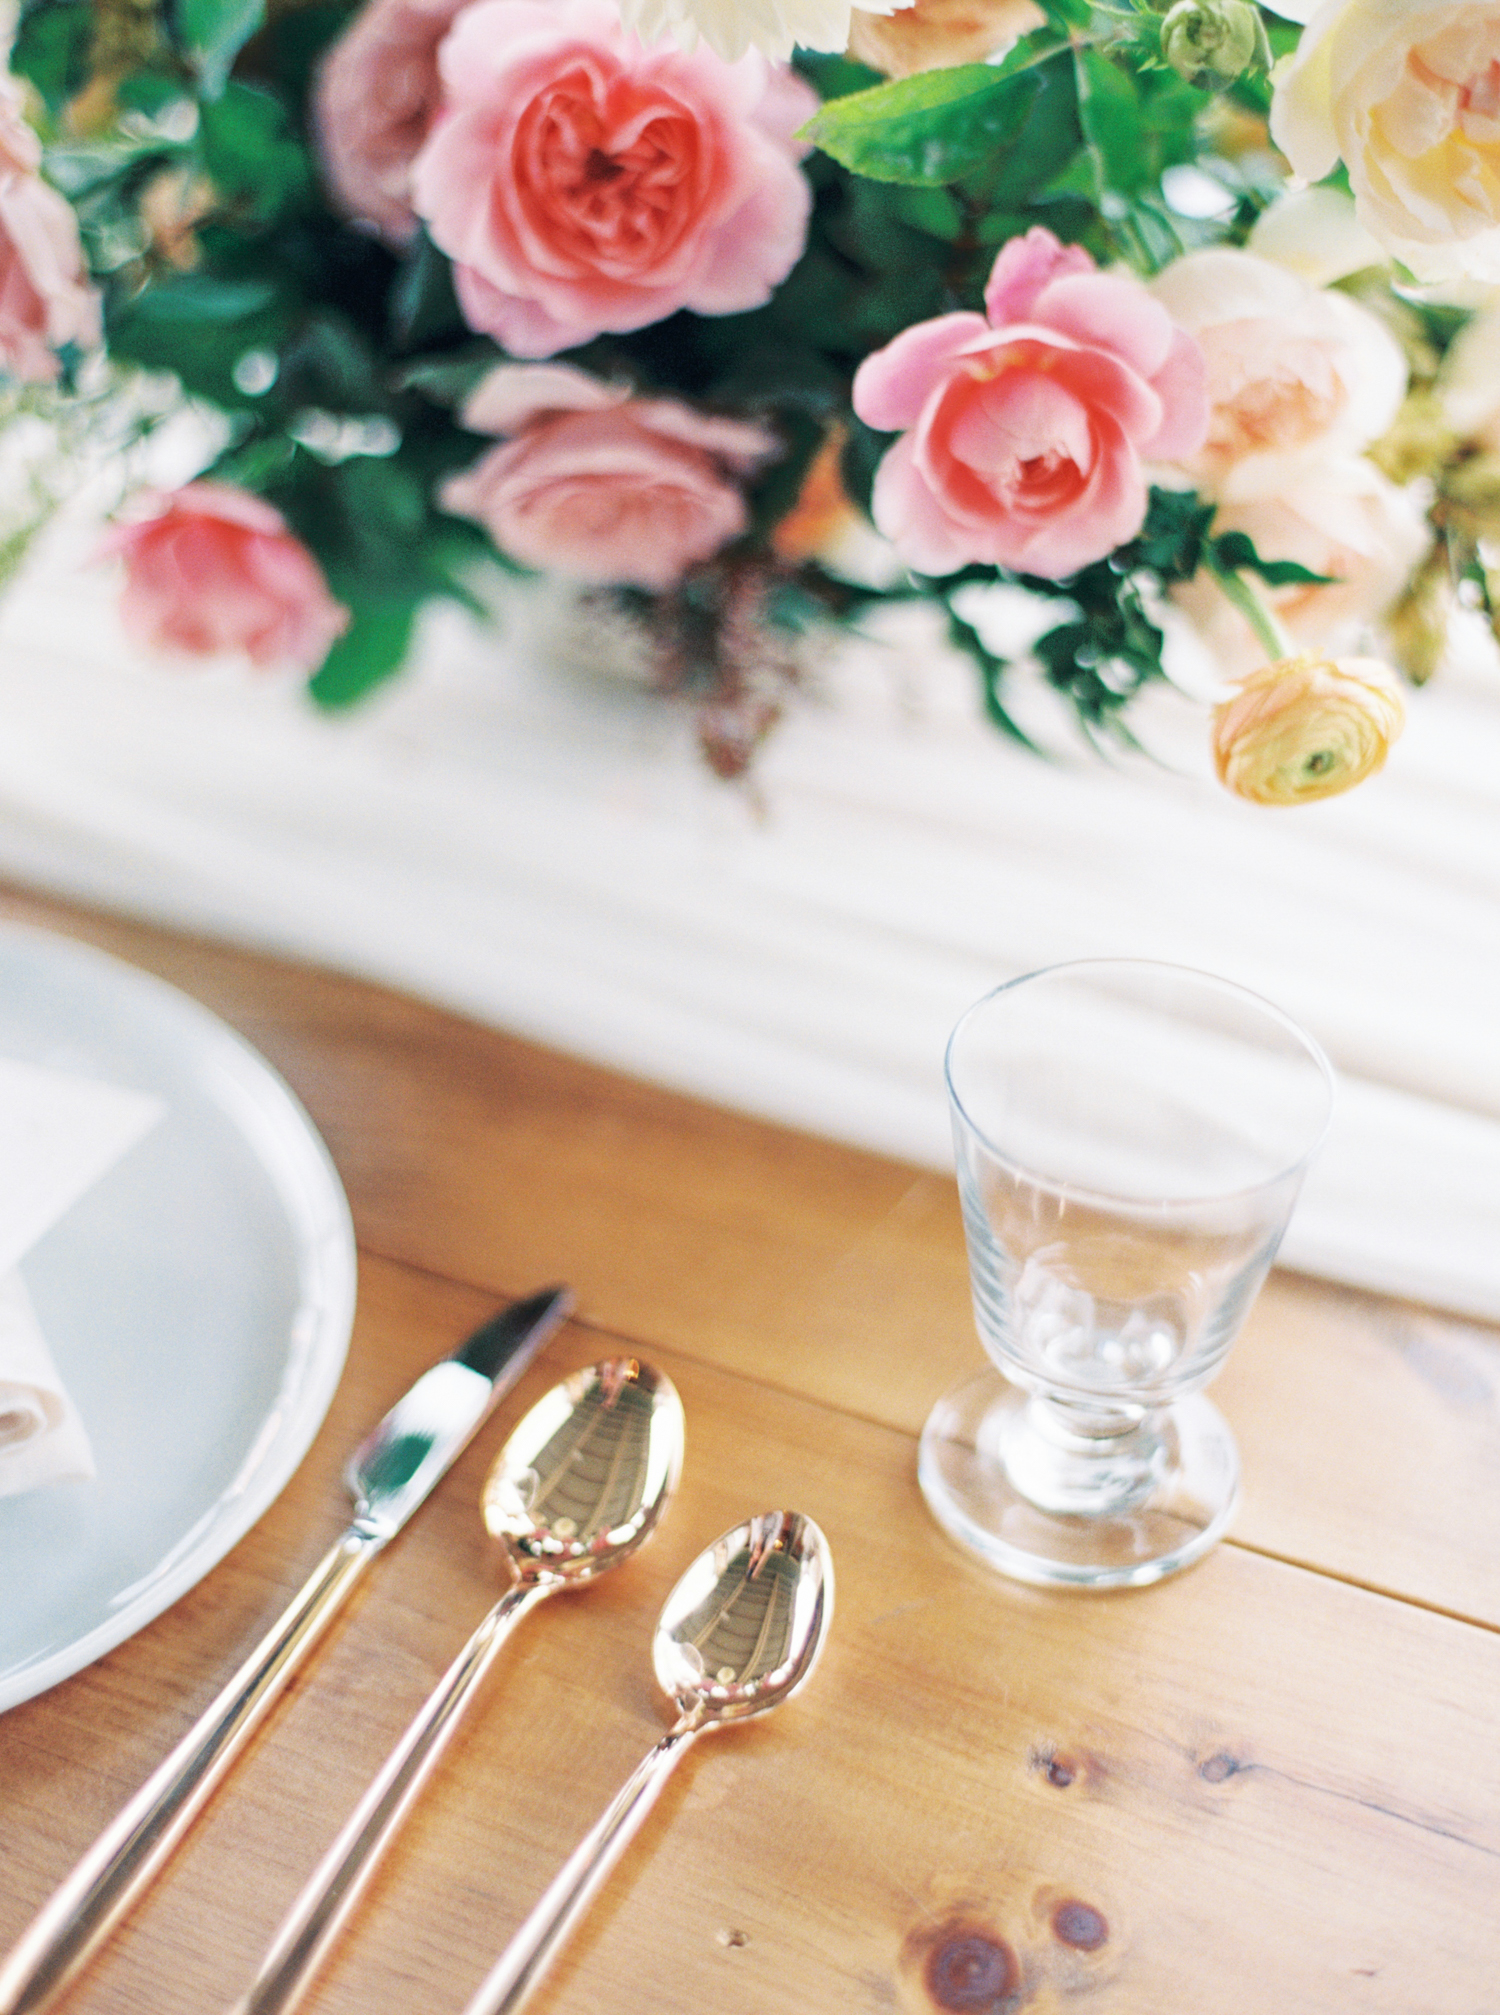 Pippin Hill Wedding Photos | Molly Carr Photography | Lauren Emerson Events | Pippin Hill Farm & Vineyard | Wedding Tablescape | Simple Wedding Decor | Wood Cafe Chairs | Wood Table | Rose Gold Flatware | Wedding Flowers | Vintage Rug Wedding Decor